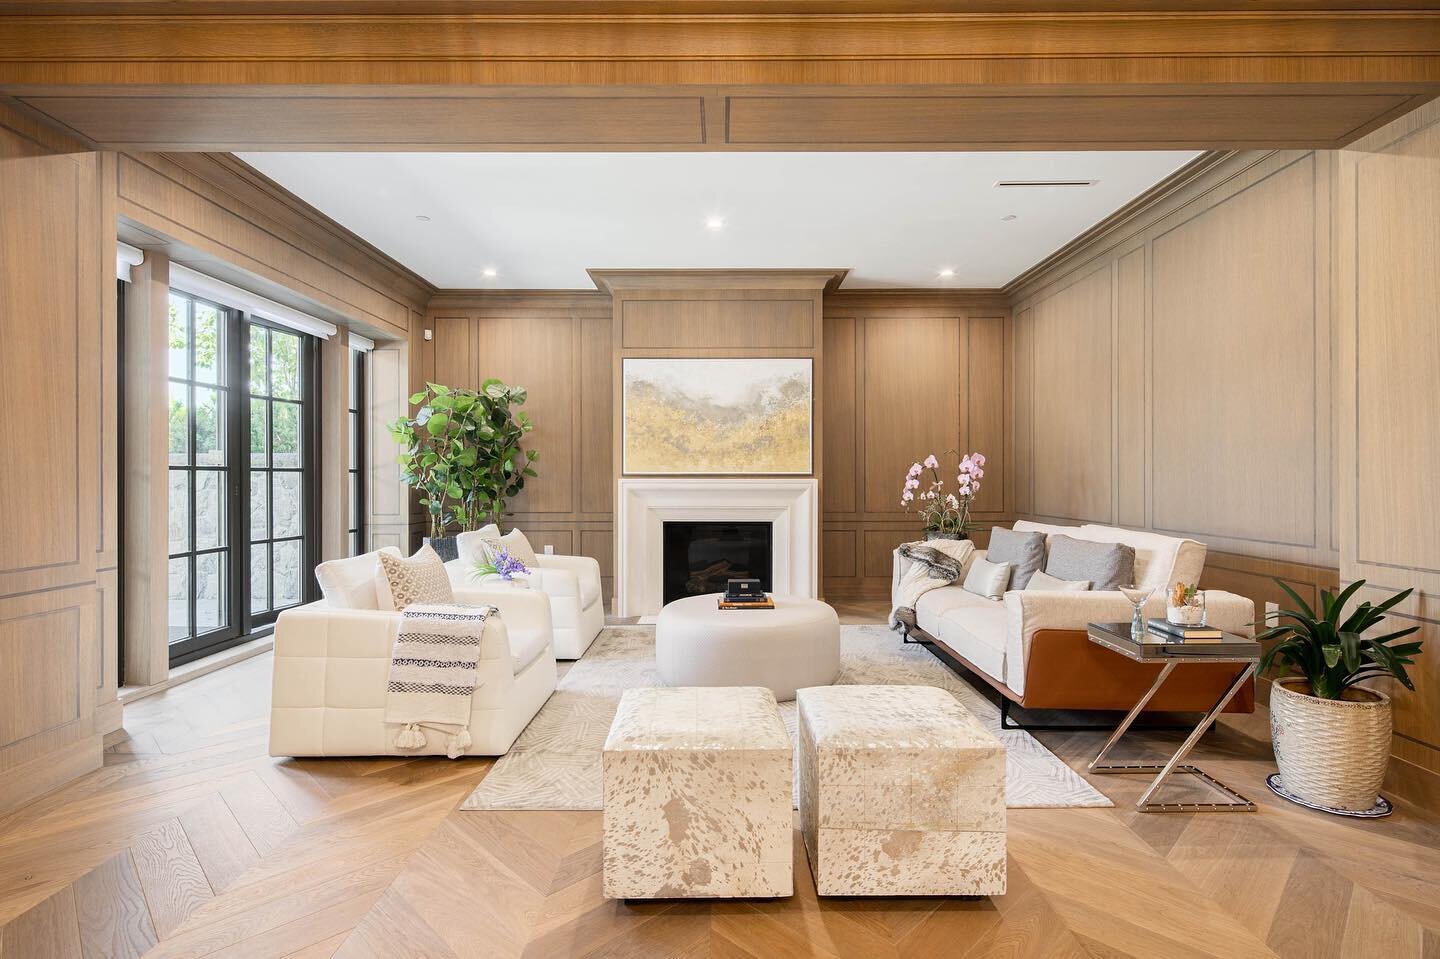 ➡️SWIPE to see Before &amp; After Staging for this $9,880,000 Point Grey Home 💫
.
.
.
.
.
.
#homestaging #homedecor #photography #realestate #vancouverrealestate #photooftheday #furniture #architecture #luxuryhomes #yvr #dailyhivevan #insidevancouve